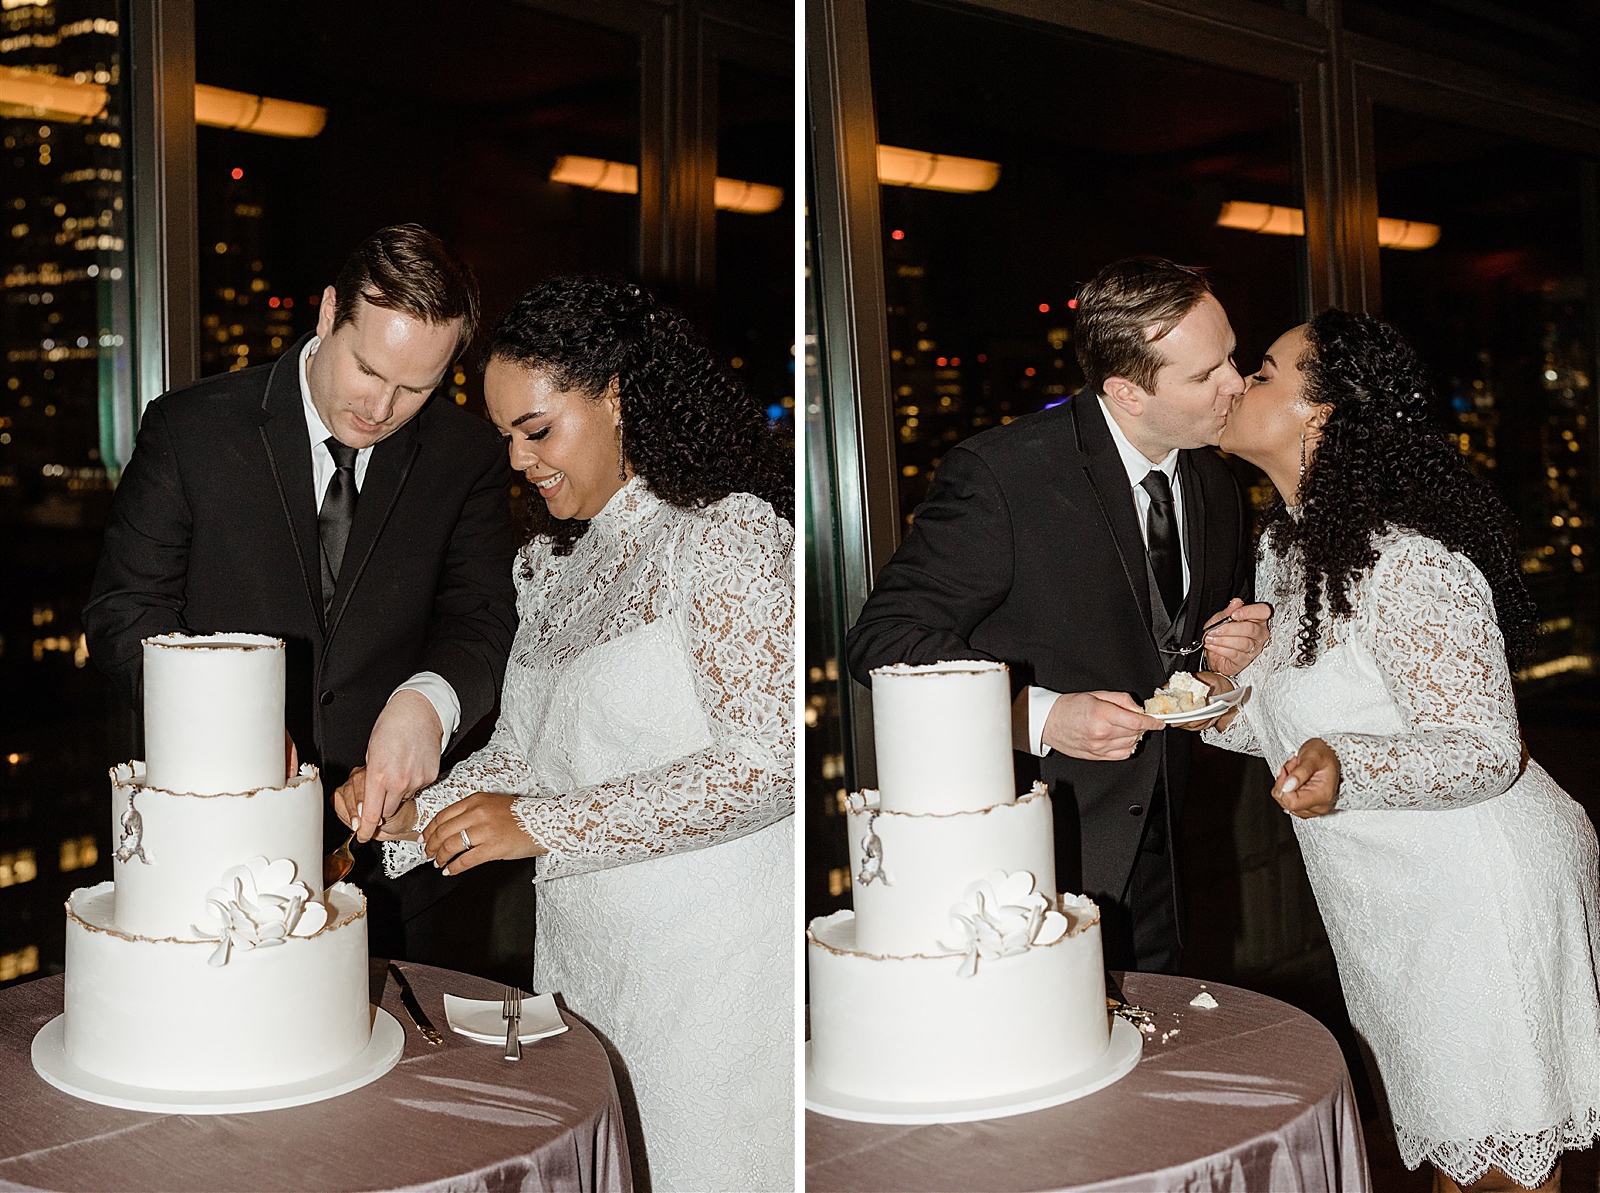 Left photo: Shot of Bride and Groom cutting their wedding cake. 
Right photo: Bride and Groom share a kiss behind their wedding cake. 